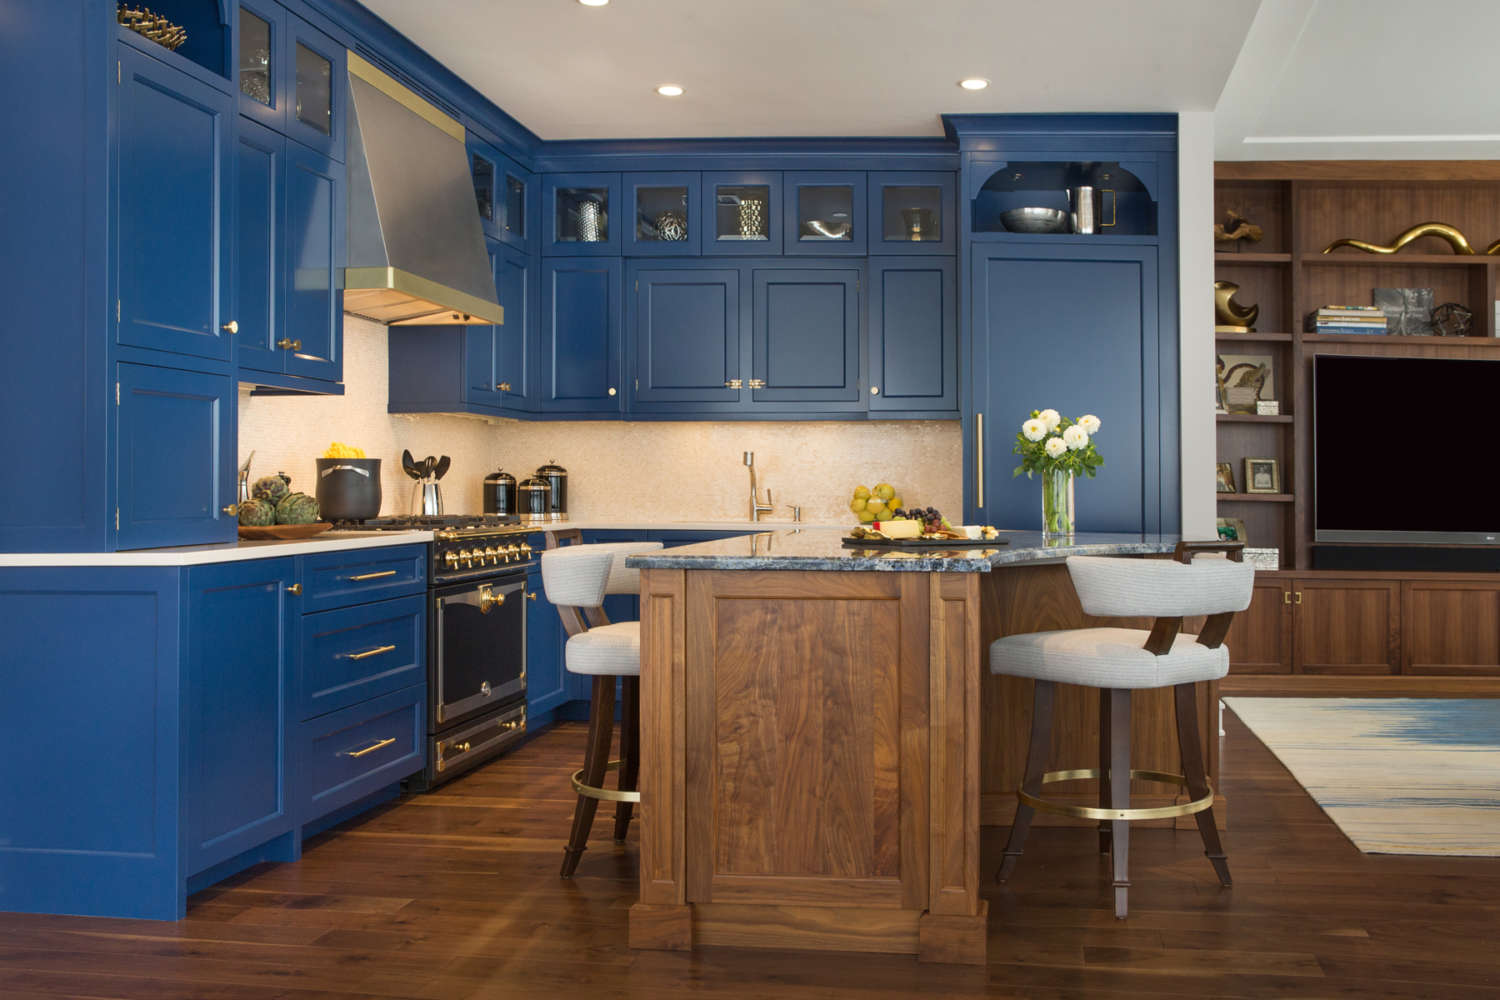 L-shaped kitchen with blue painted custom kitchen cabinets with shaker style doors. Walnut island with seating. Bilotta custom cabinets and shelving in walnut with mid-century modern vibe in adjacent living room area. Designed by Jeni Spaeth of Bilotta Kitchens.